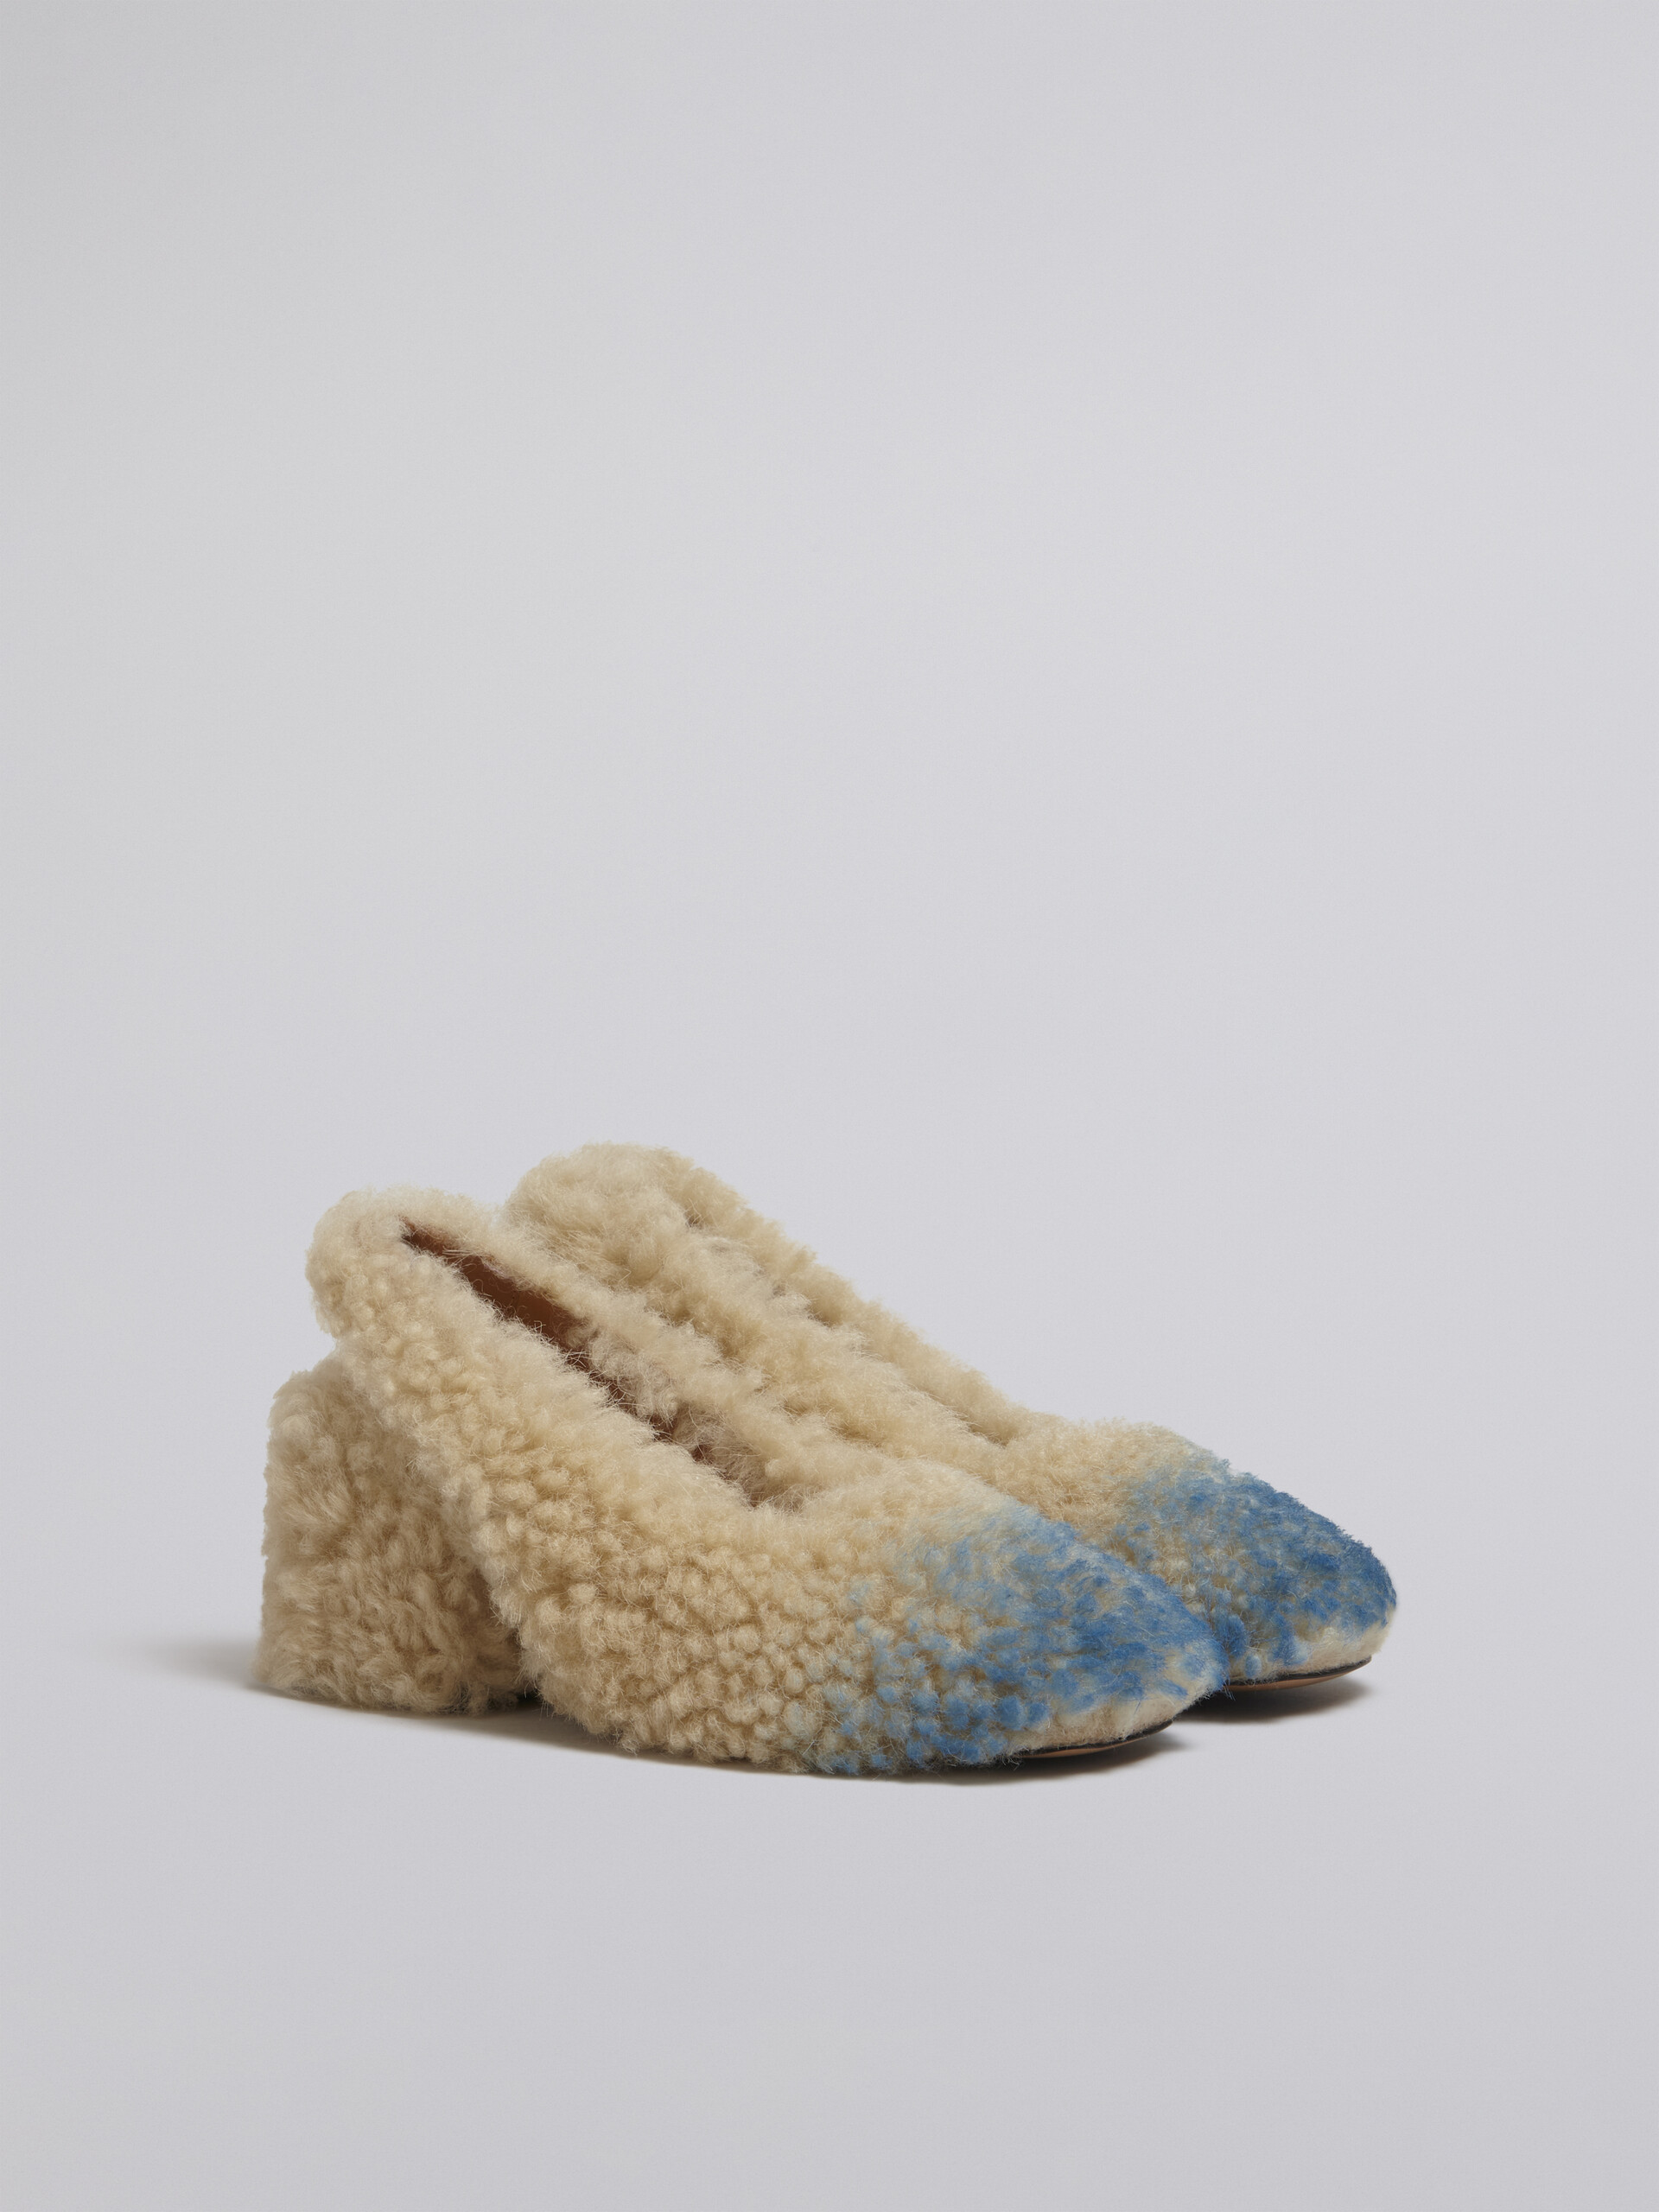 Sheepskin pump with square colourful spray captoe - Sandals - Image 2